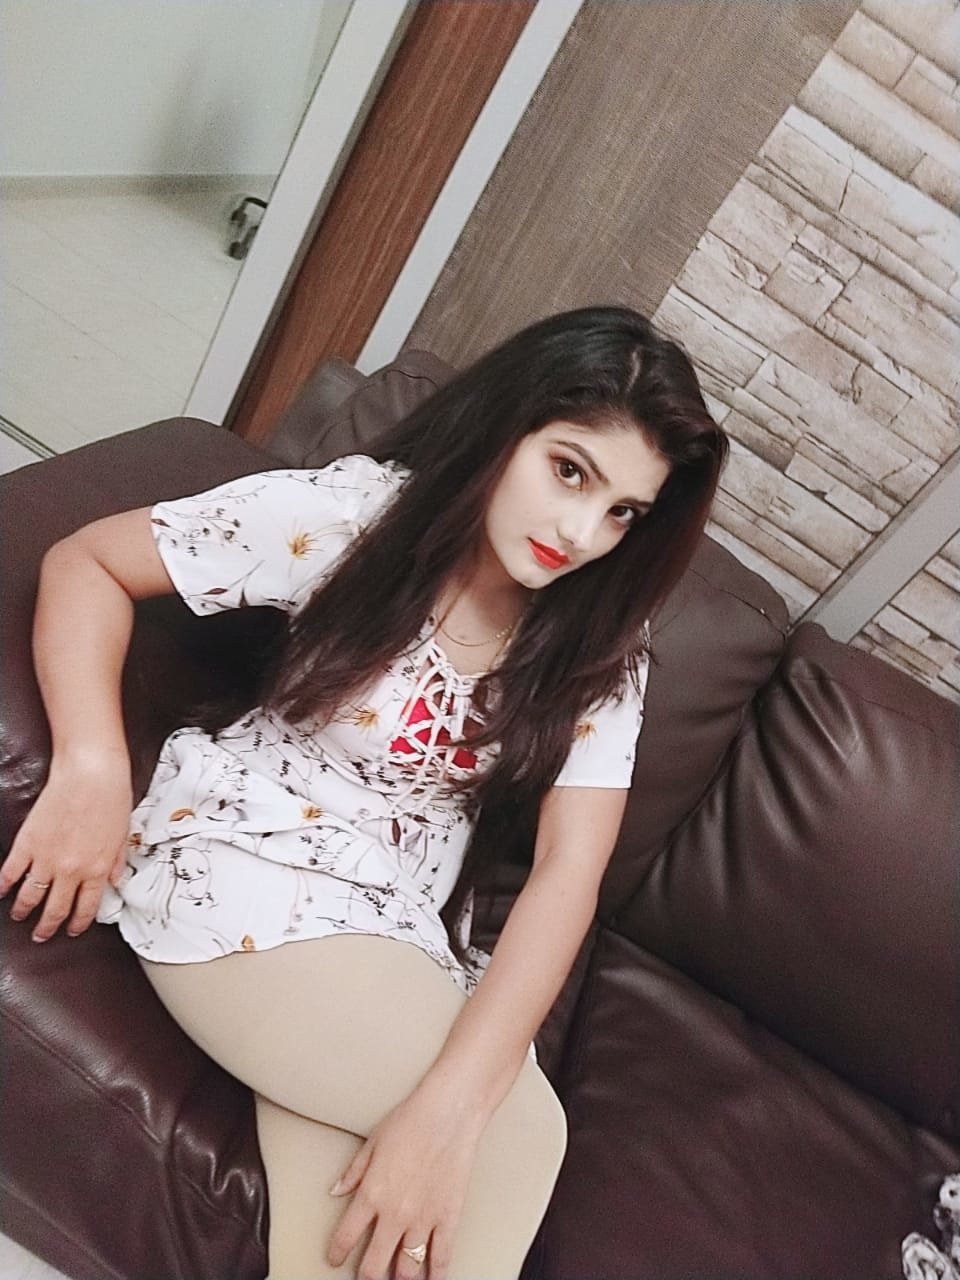 
Amritsar ❣️ best Low price High profile call❣️ girls available